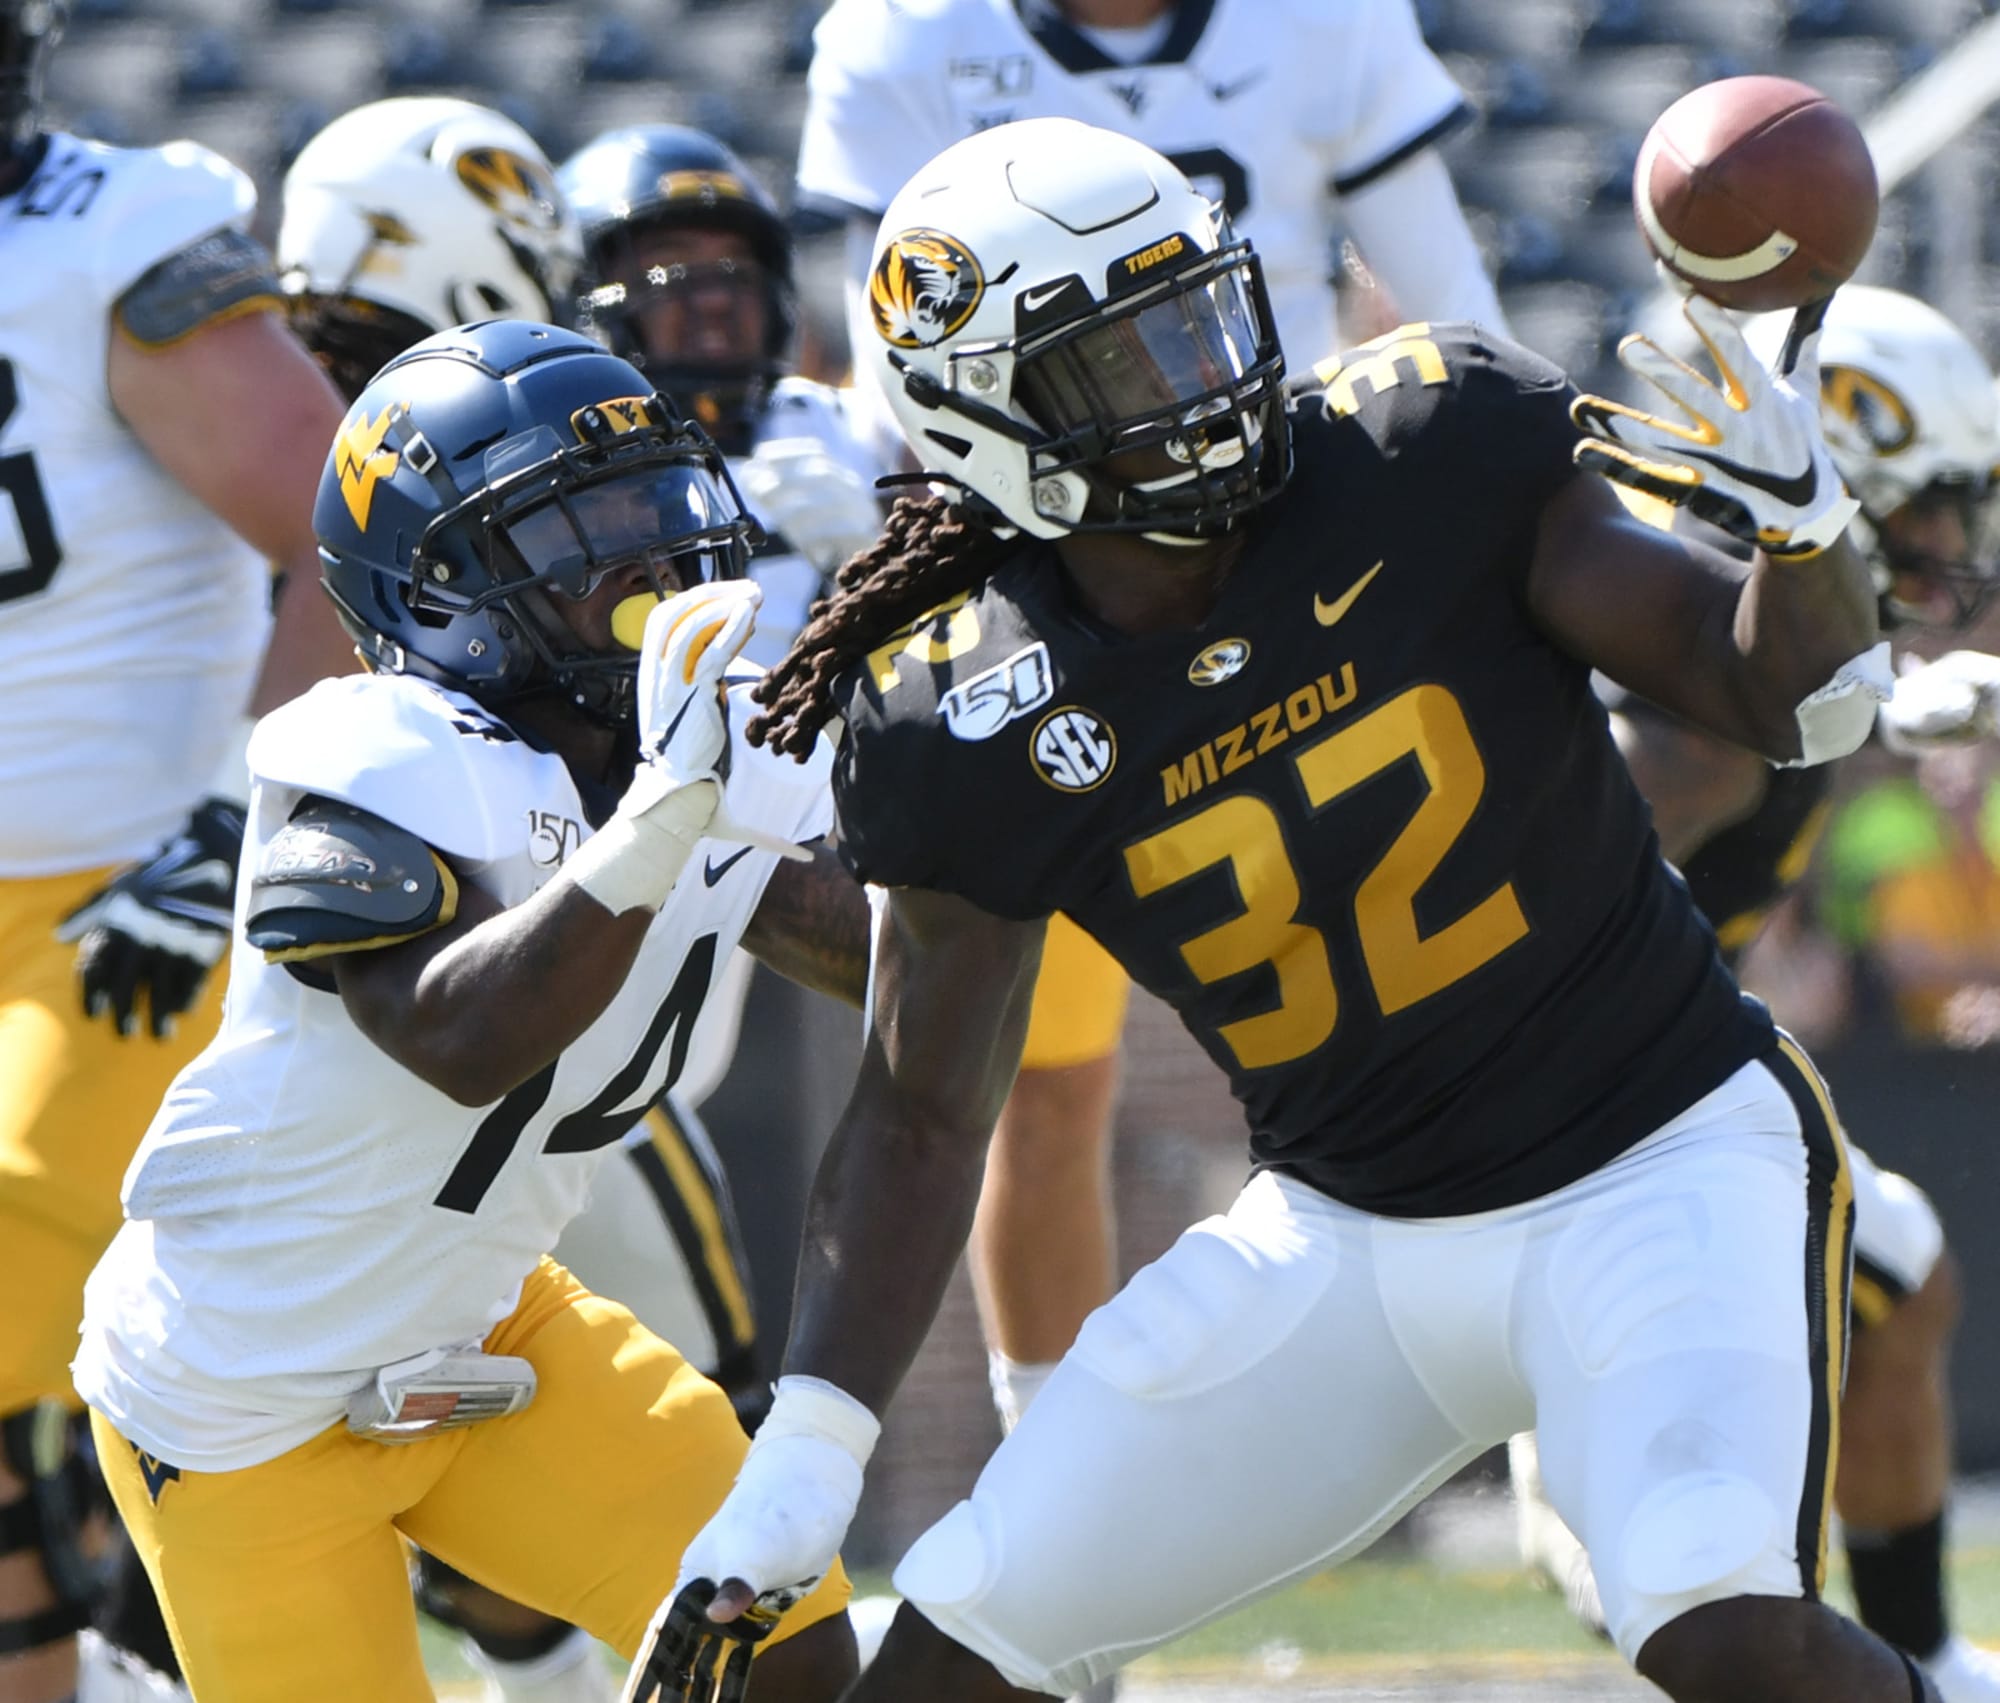 Mizzou football Bolton named SEC Defensive Player of the Week